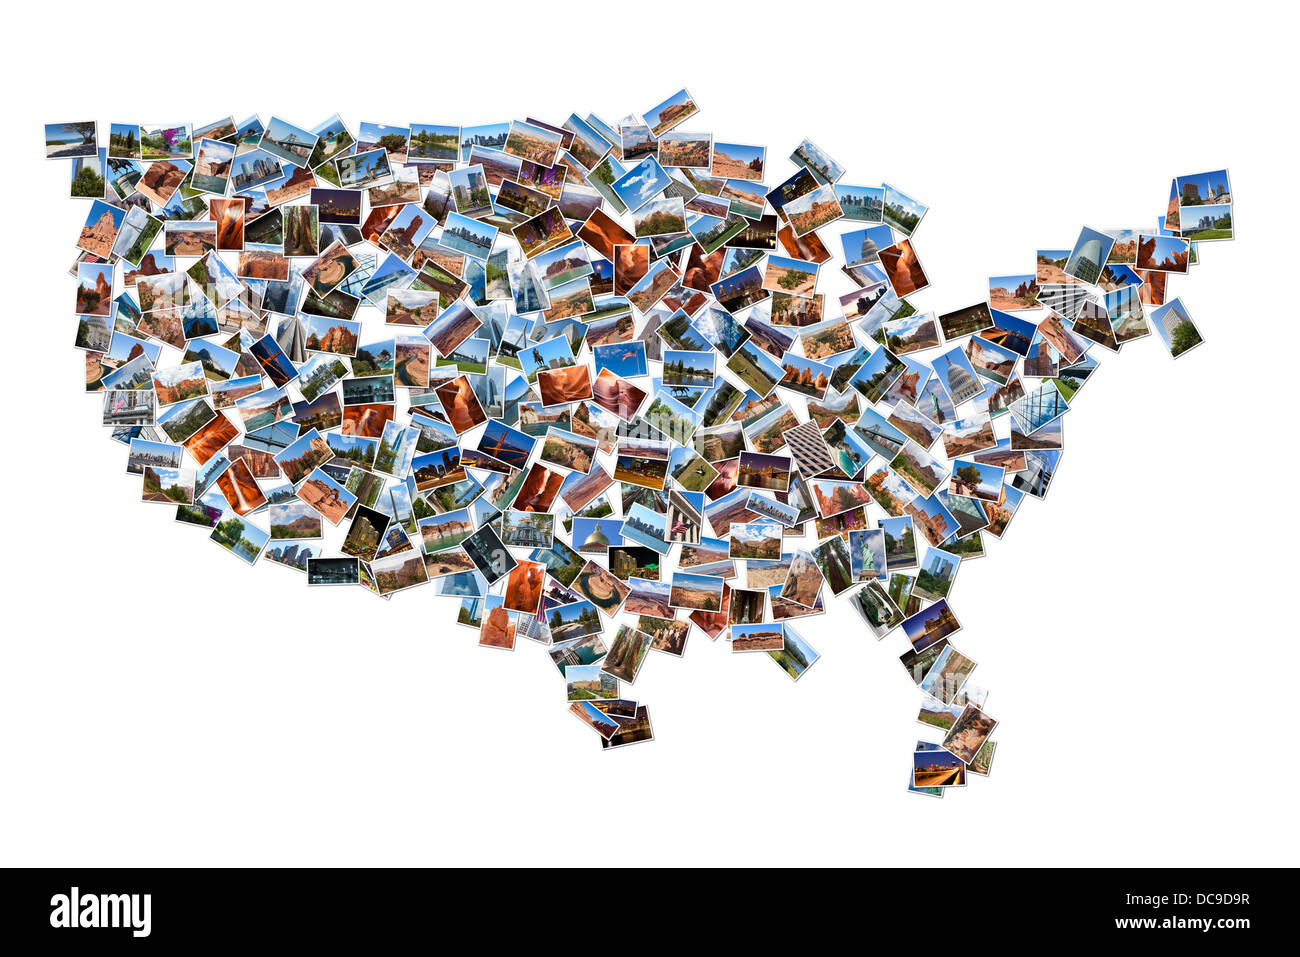 USA map shape drawn with pictures, over white background Stock Photo